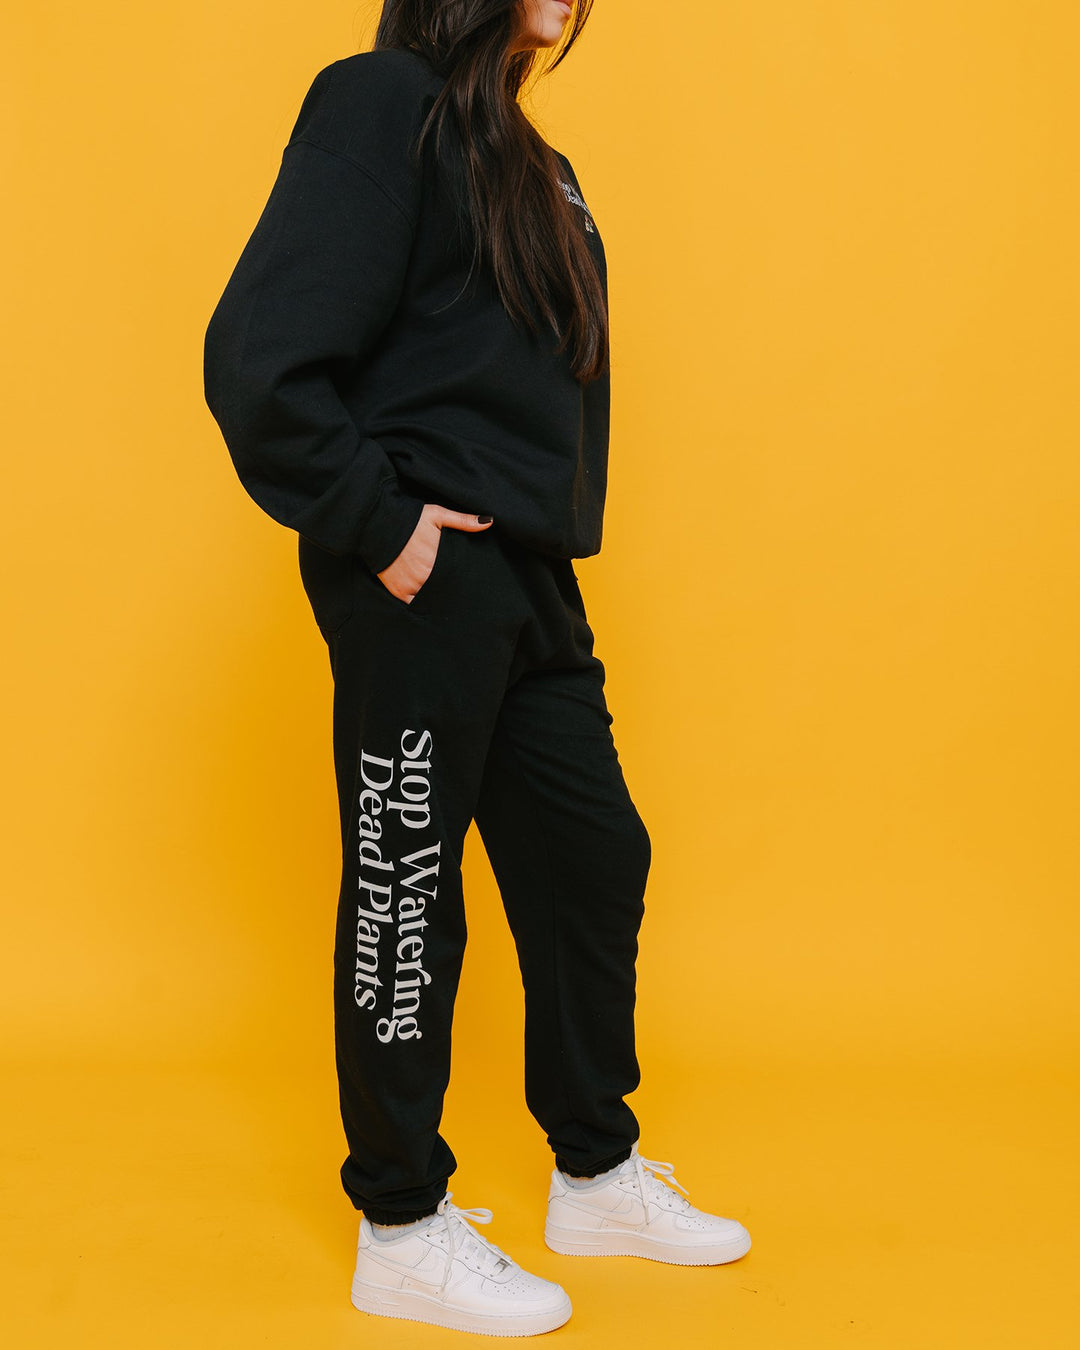 Stop Watering Dead Plants Sweatpants V2 - trainofthoughtcollective